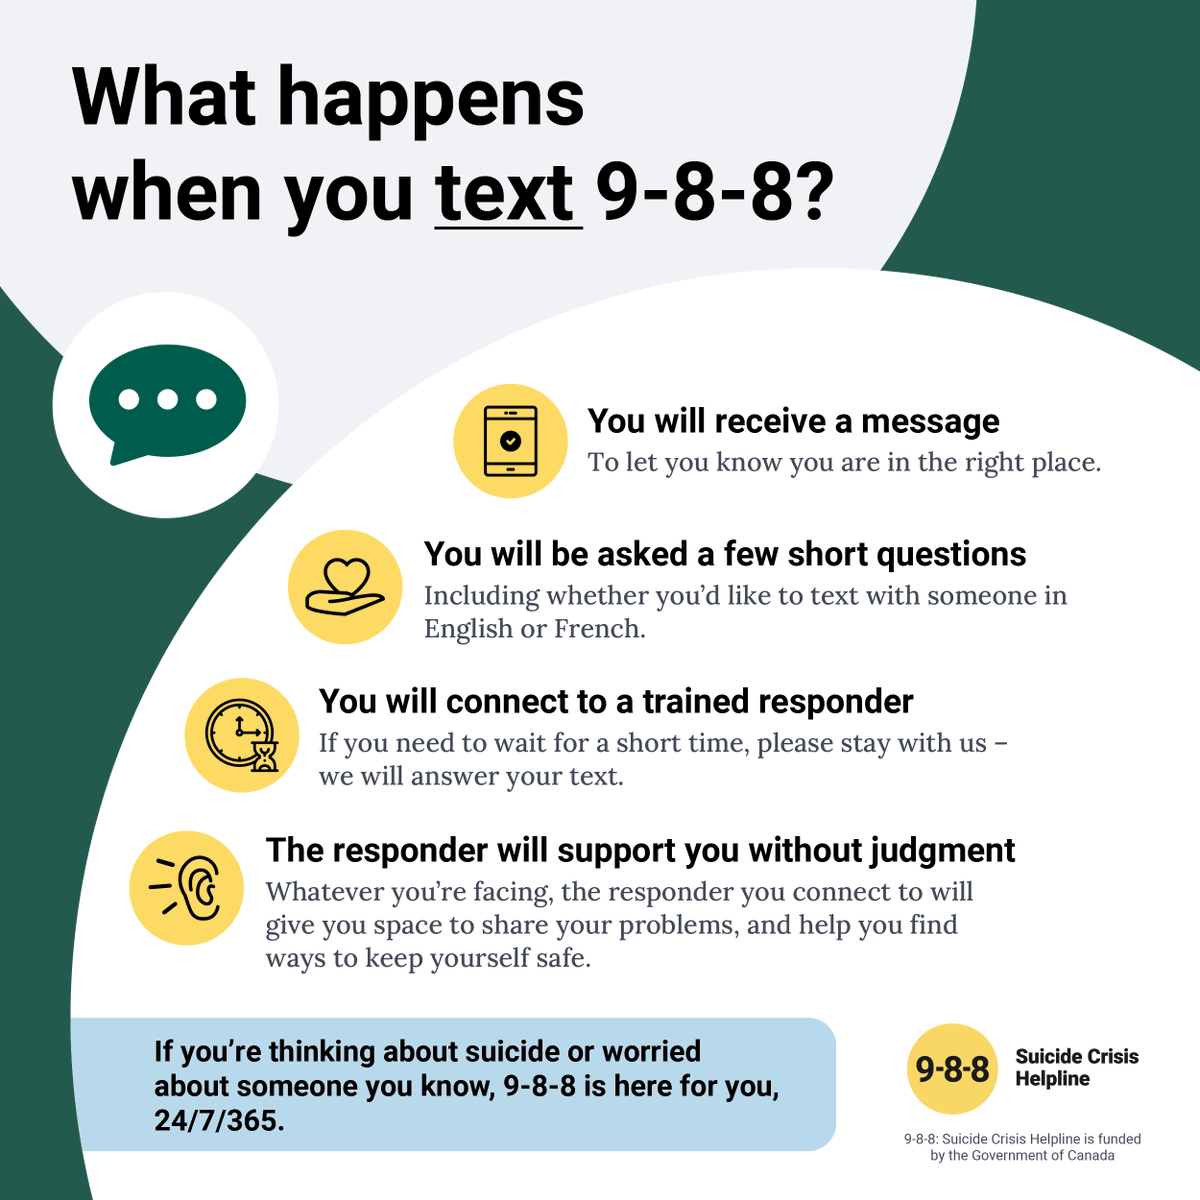 Calling 9-8-8 isn’t the only way to ask for help. Maybe you’re too nervous to call, or not in a position to talk openly without being overheard. Whatever the reason, you can always text us for the same level of support, and our responders will communicate with you by text.